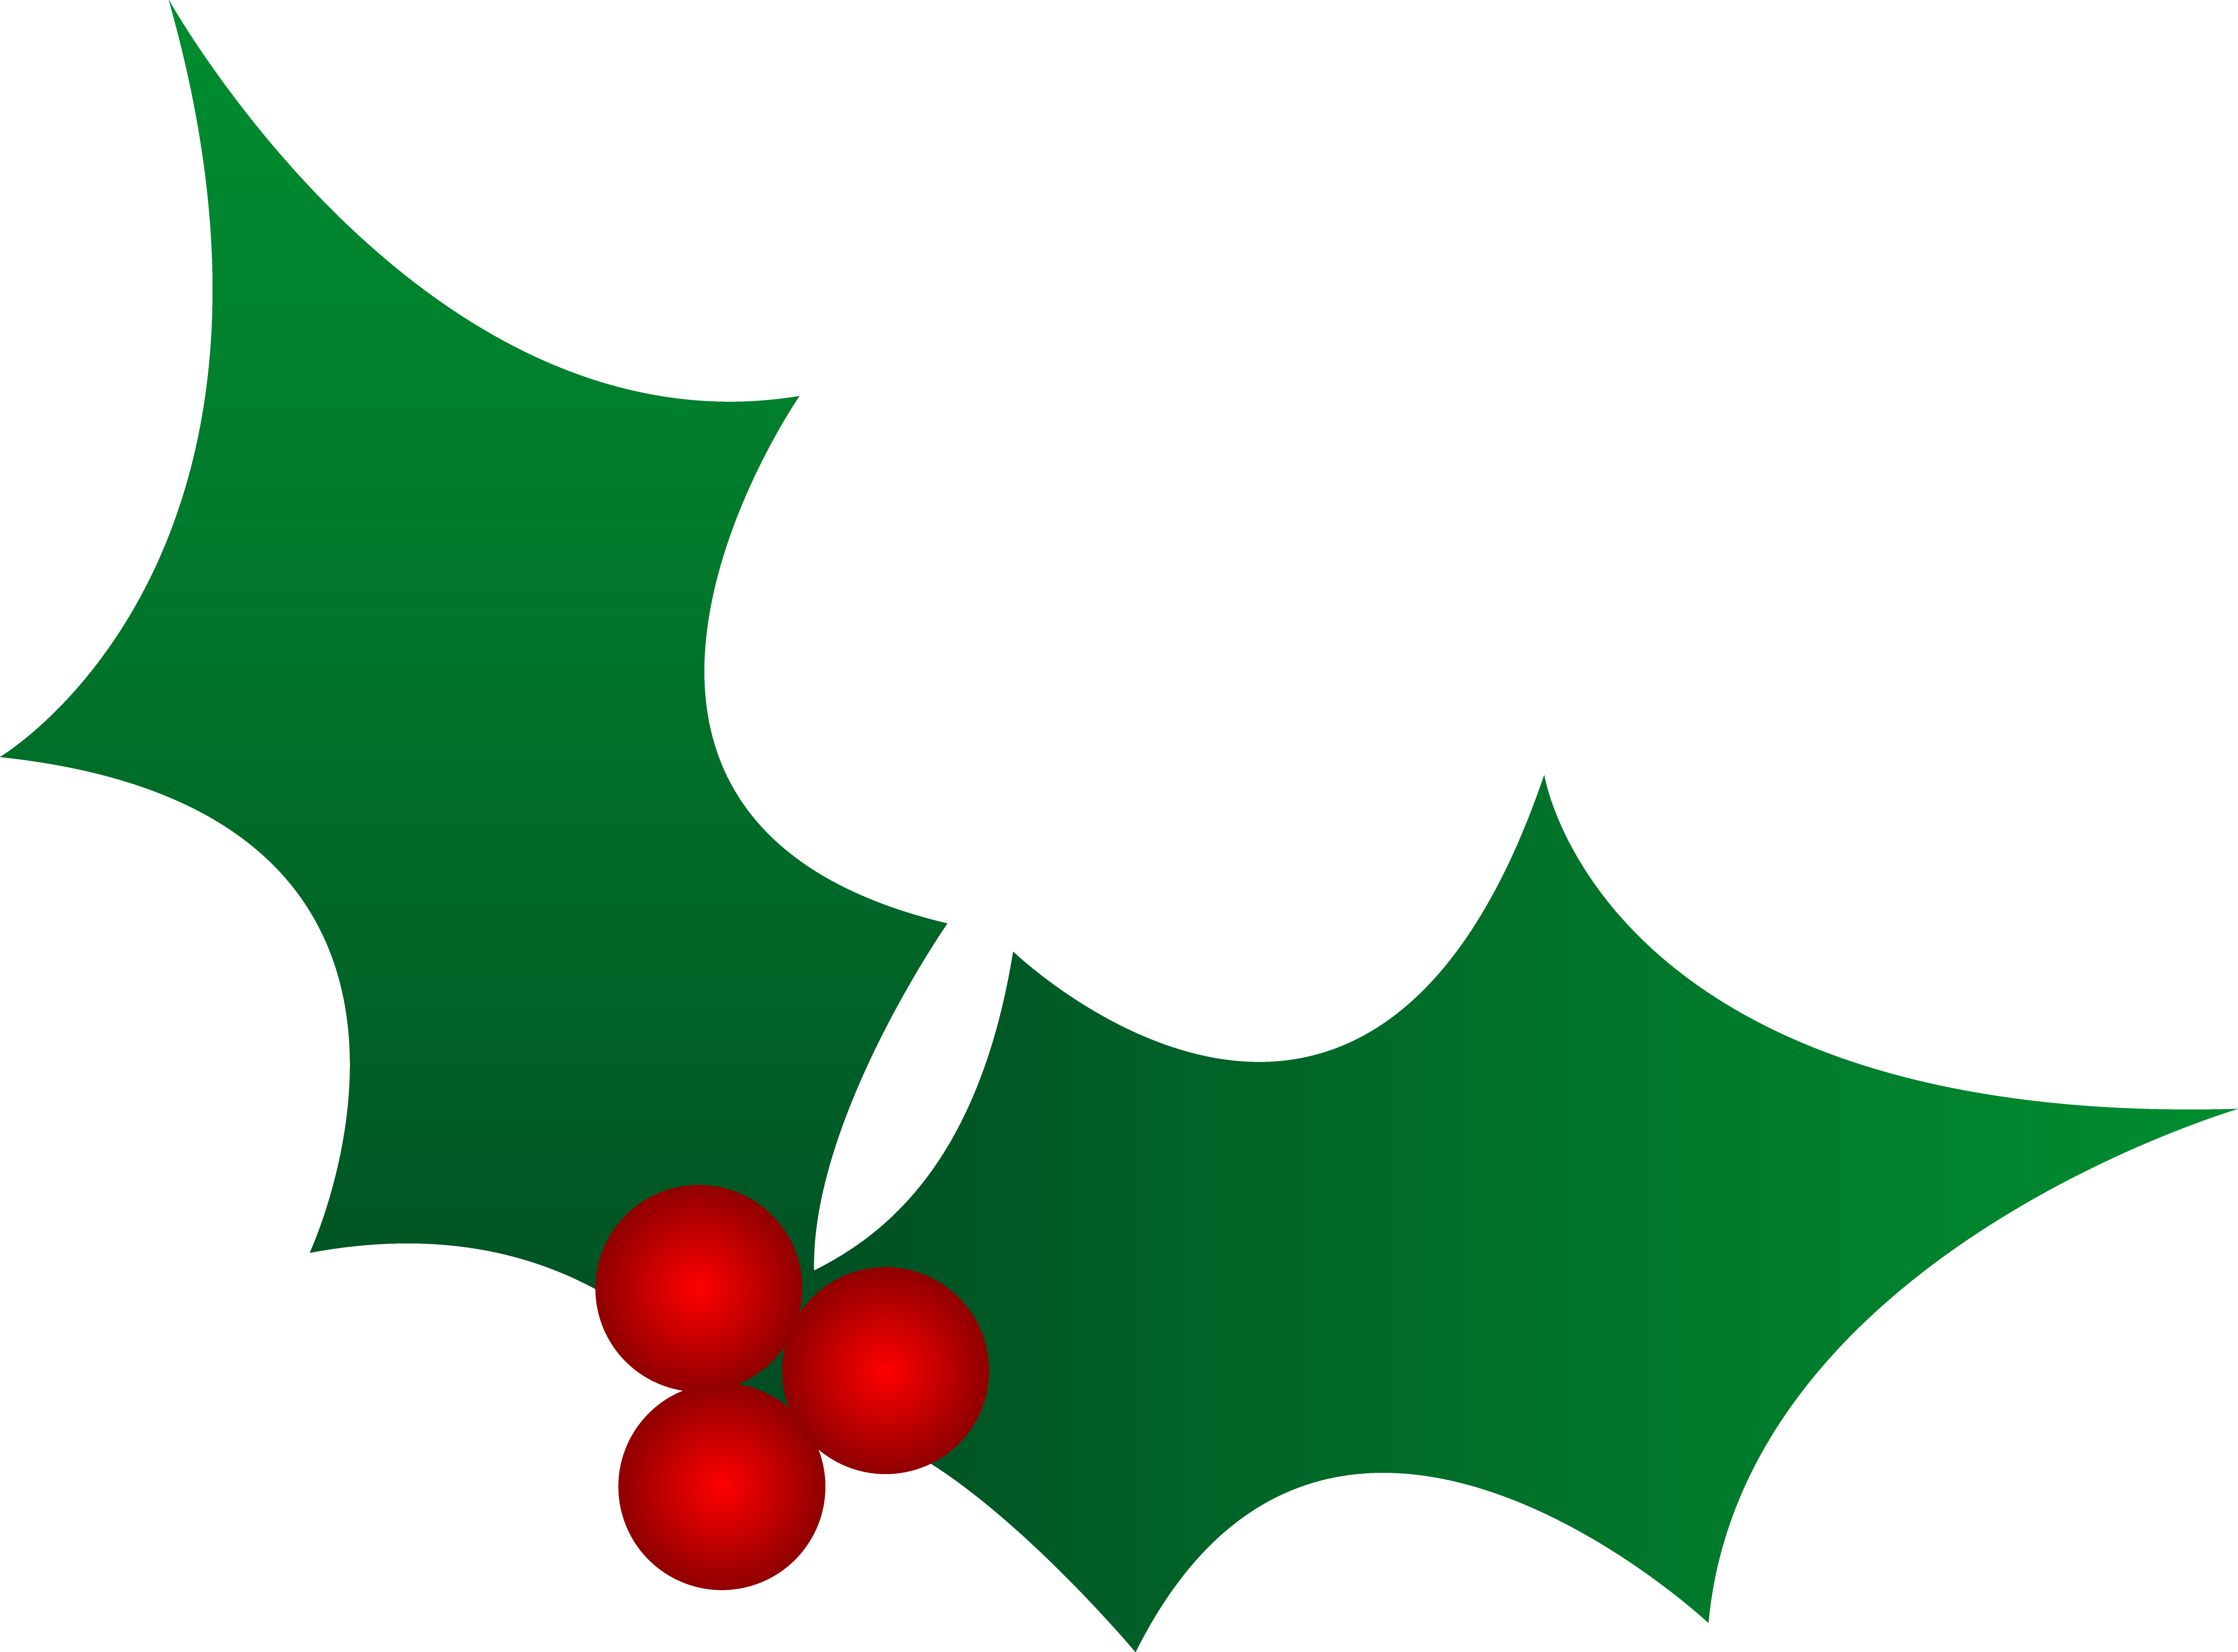 Christmas Holly Clip Art Borders | Clipart Panda - Free Clipart Images